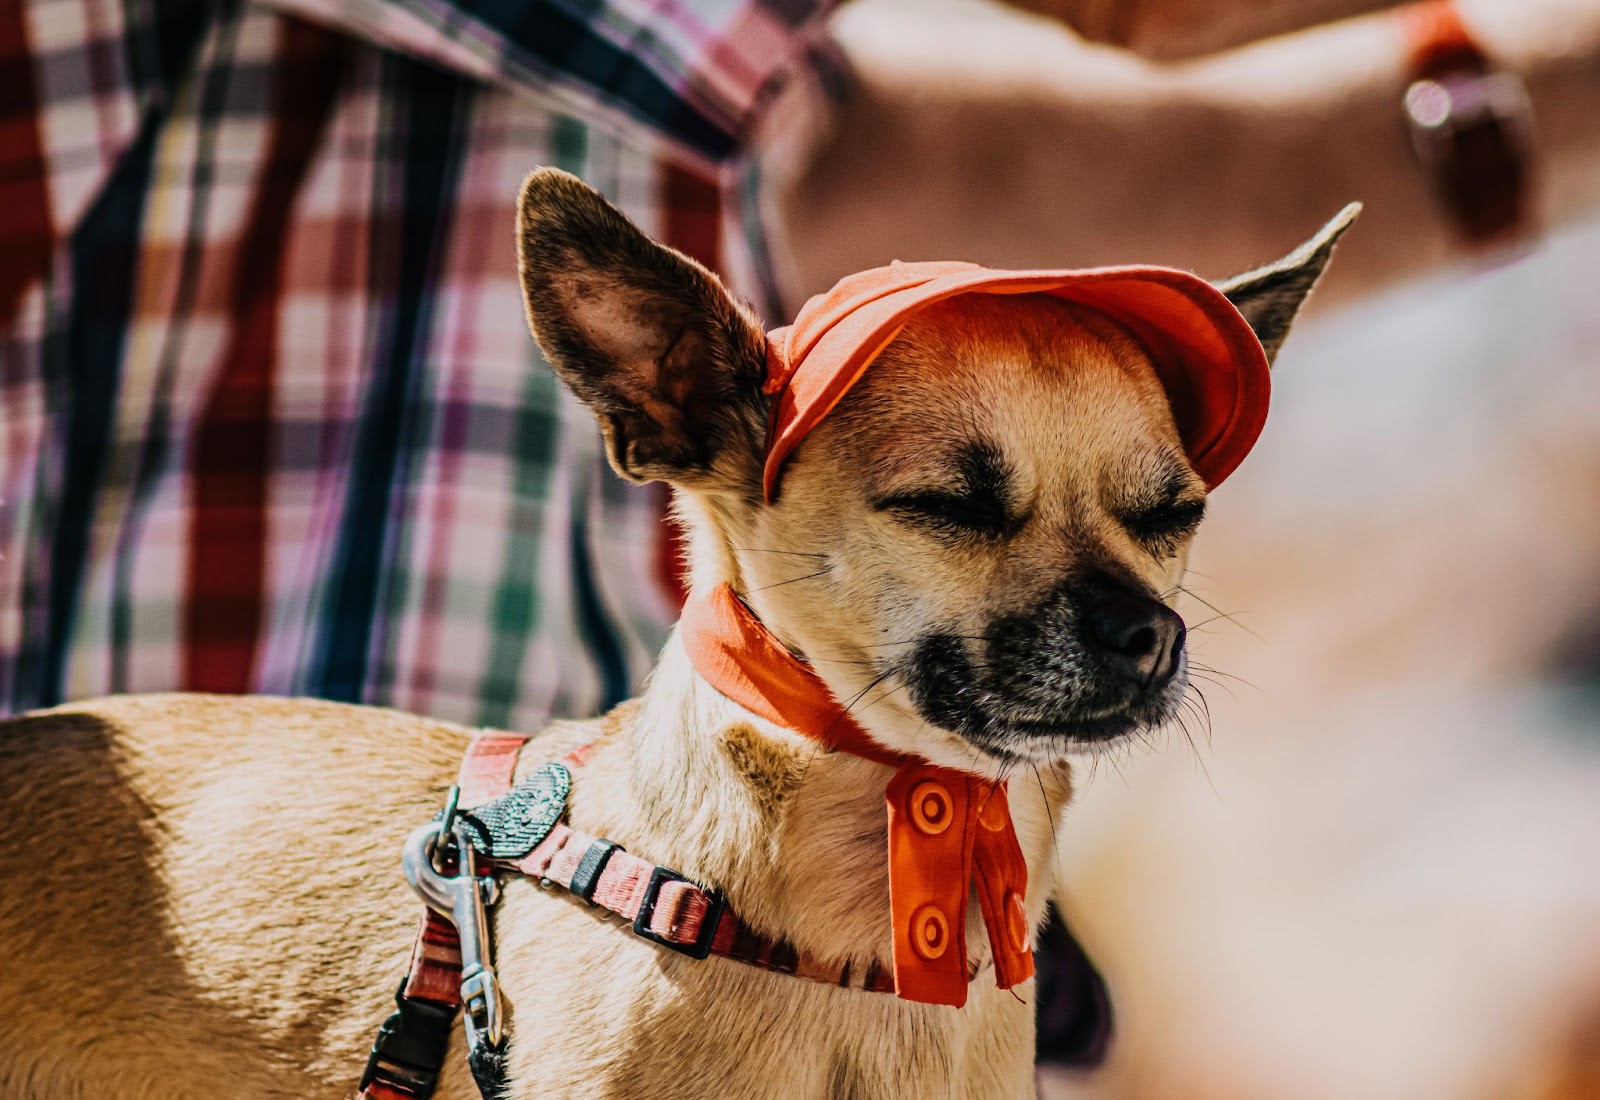 a golden chihuahua wearing a red dog hat with ears poking out